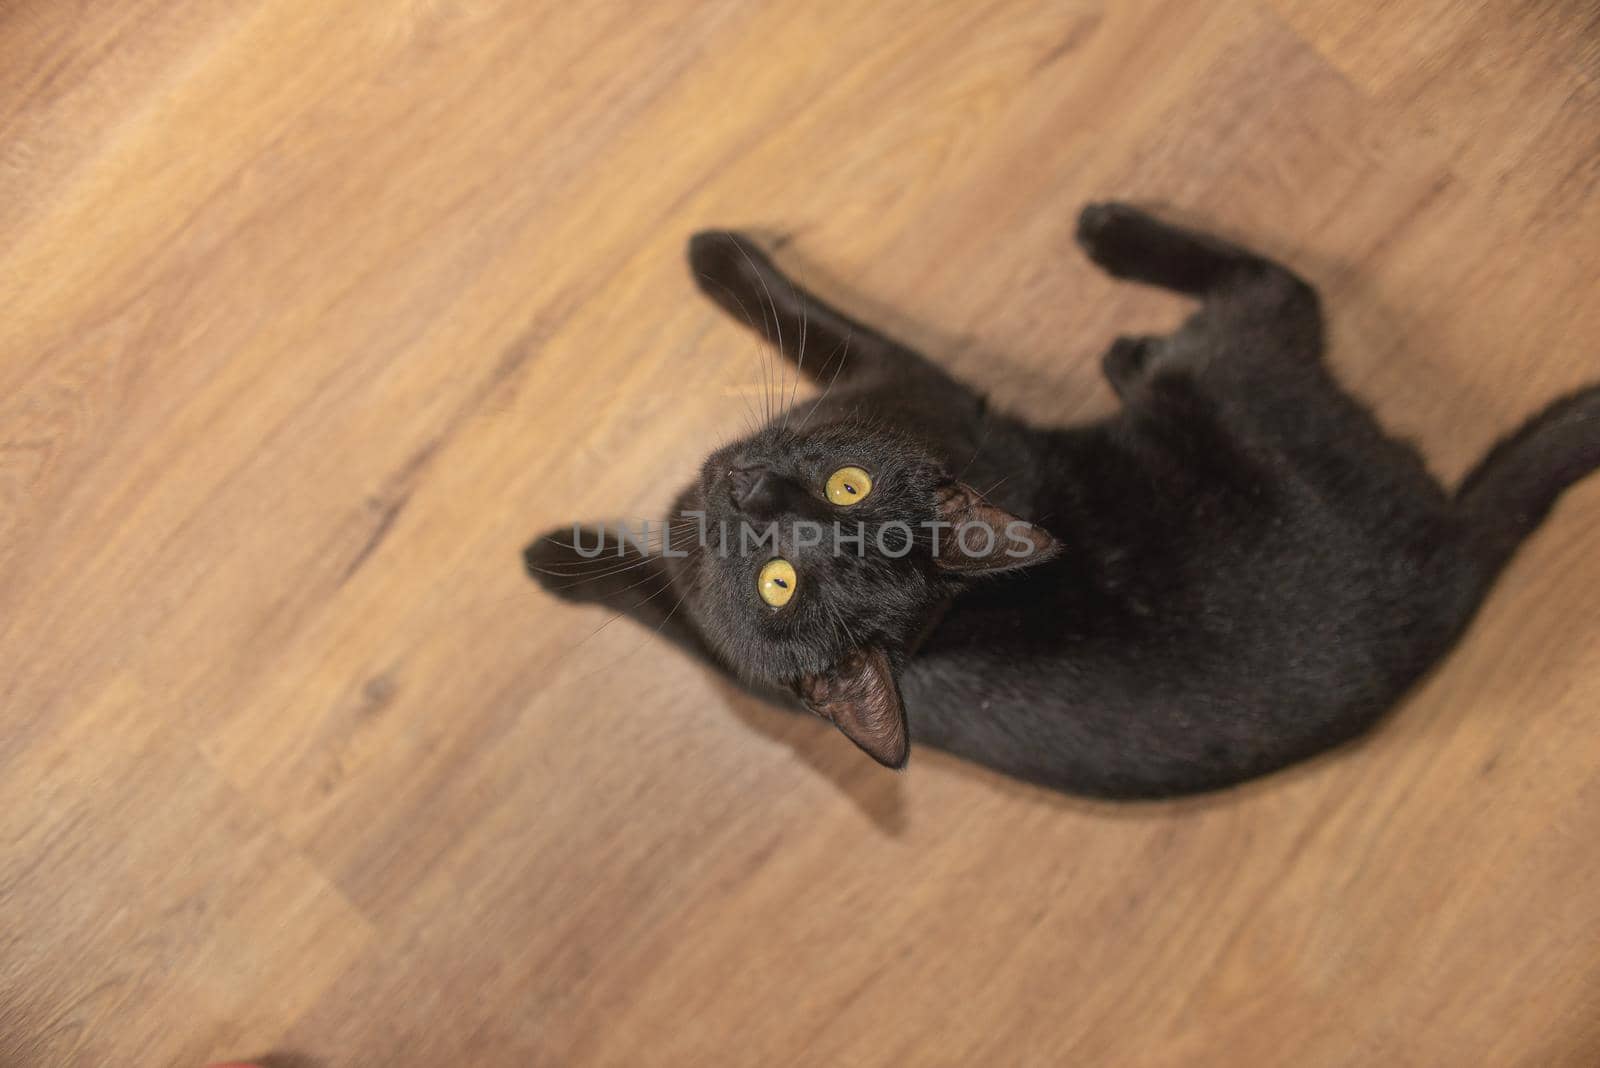 black cat with yellow eyes lies on its side, legs outstretched on the laminate by ozornina